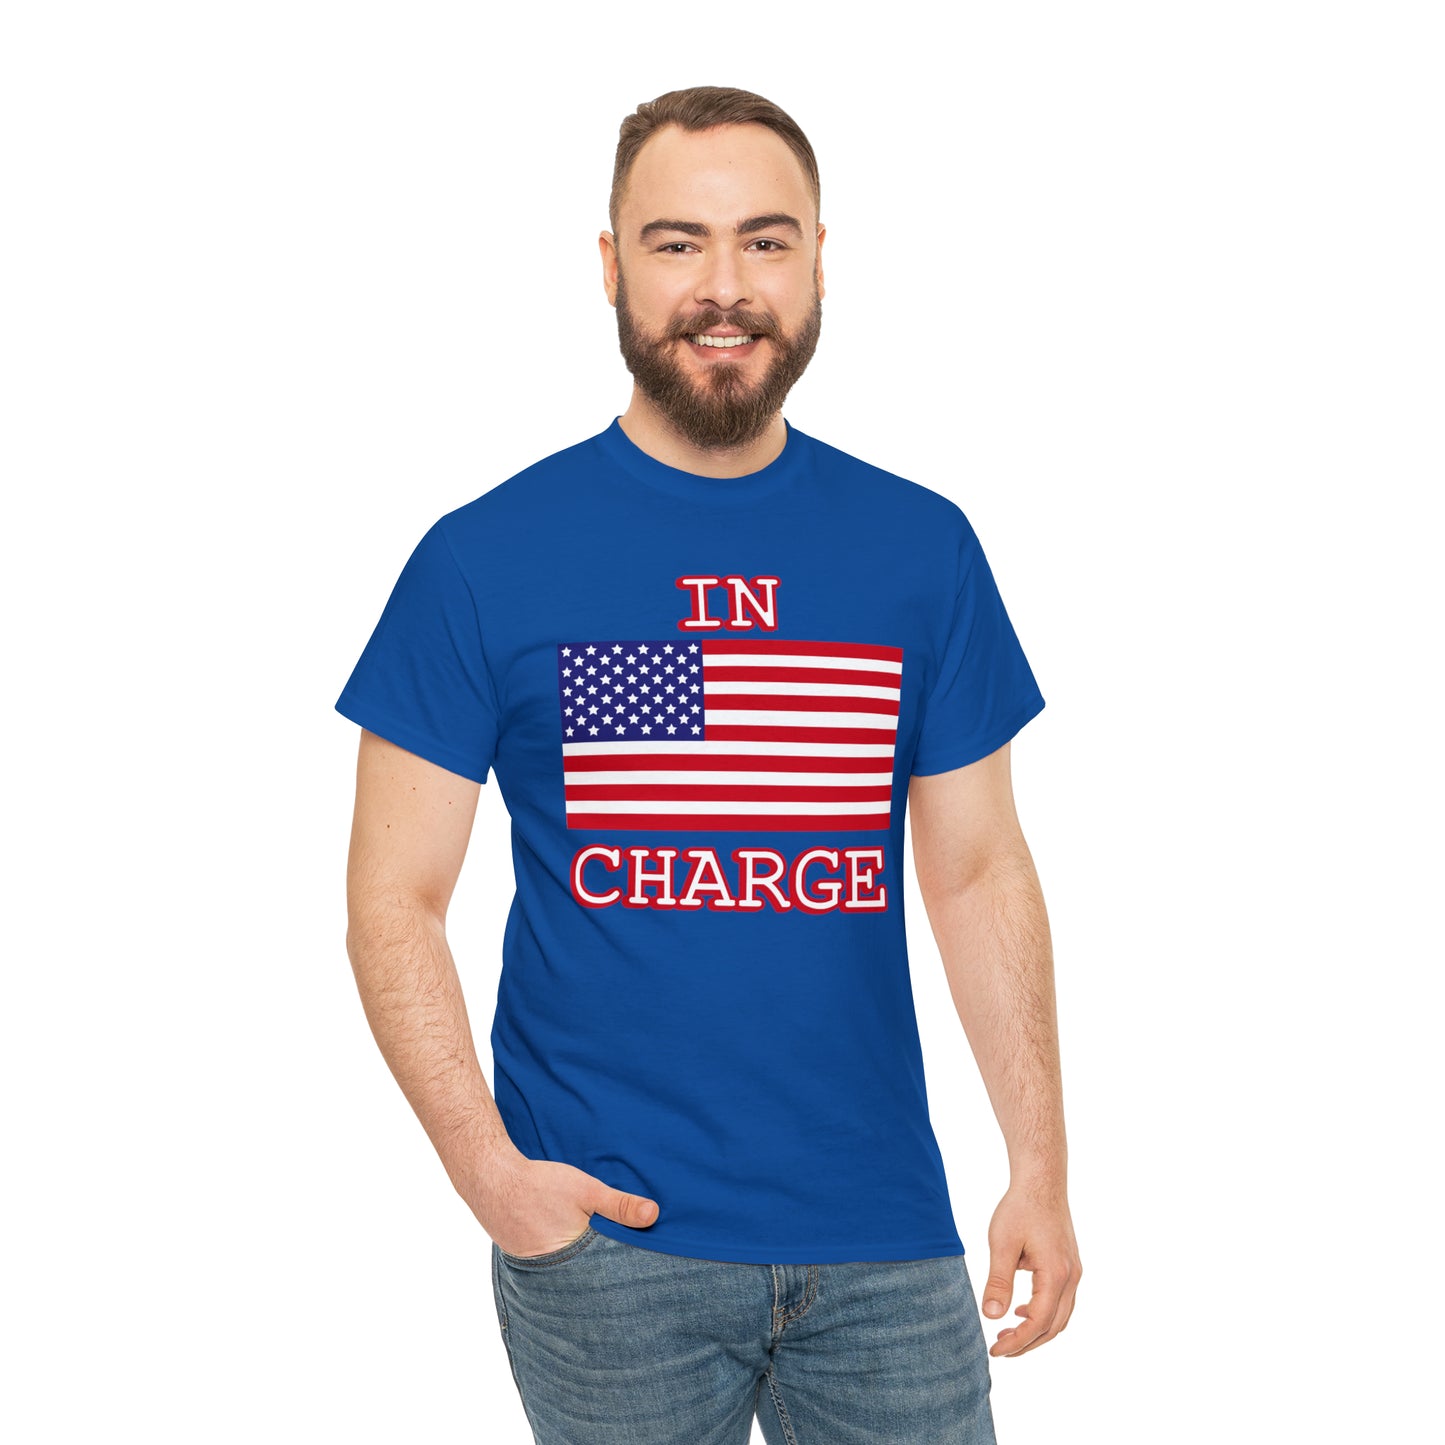 IN CHARGE - Hurts Shirts Collection